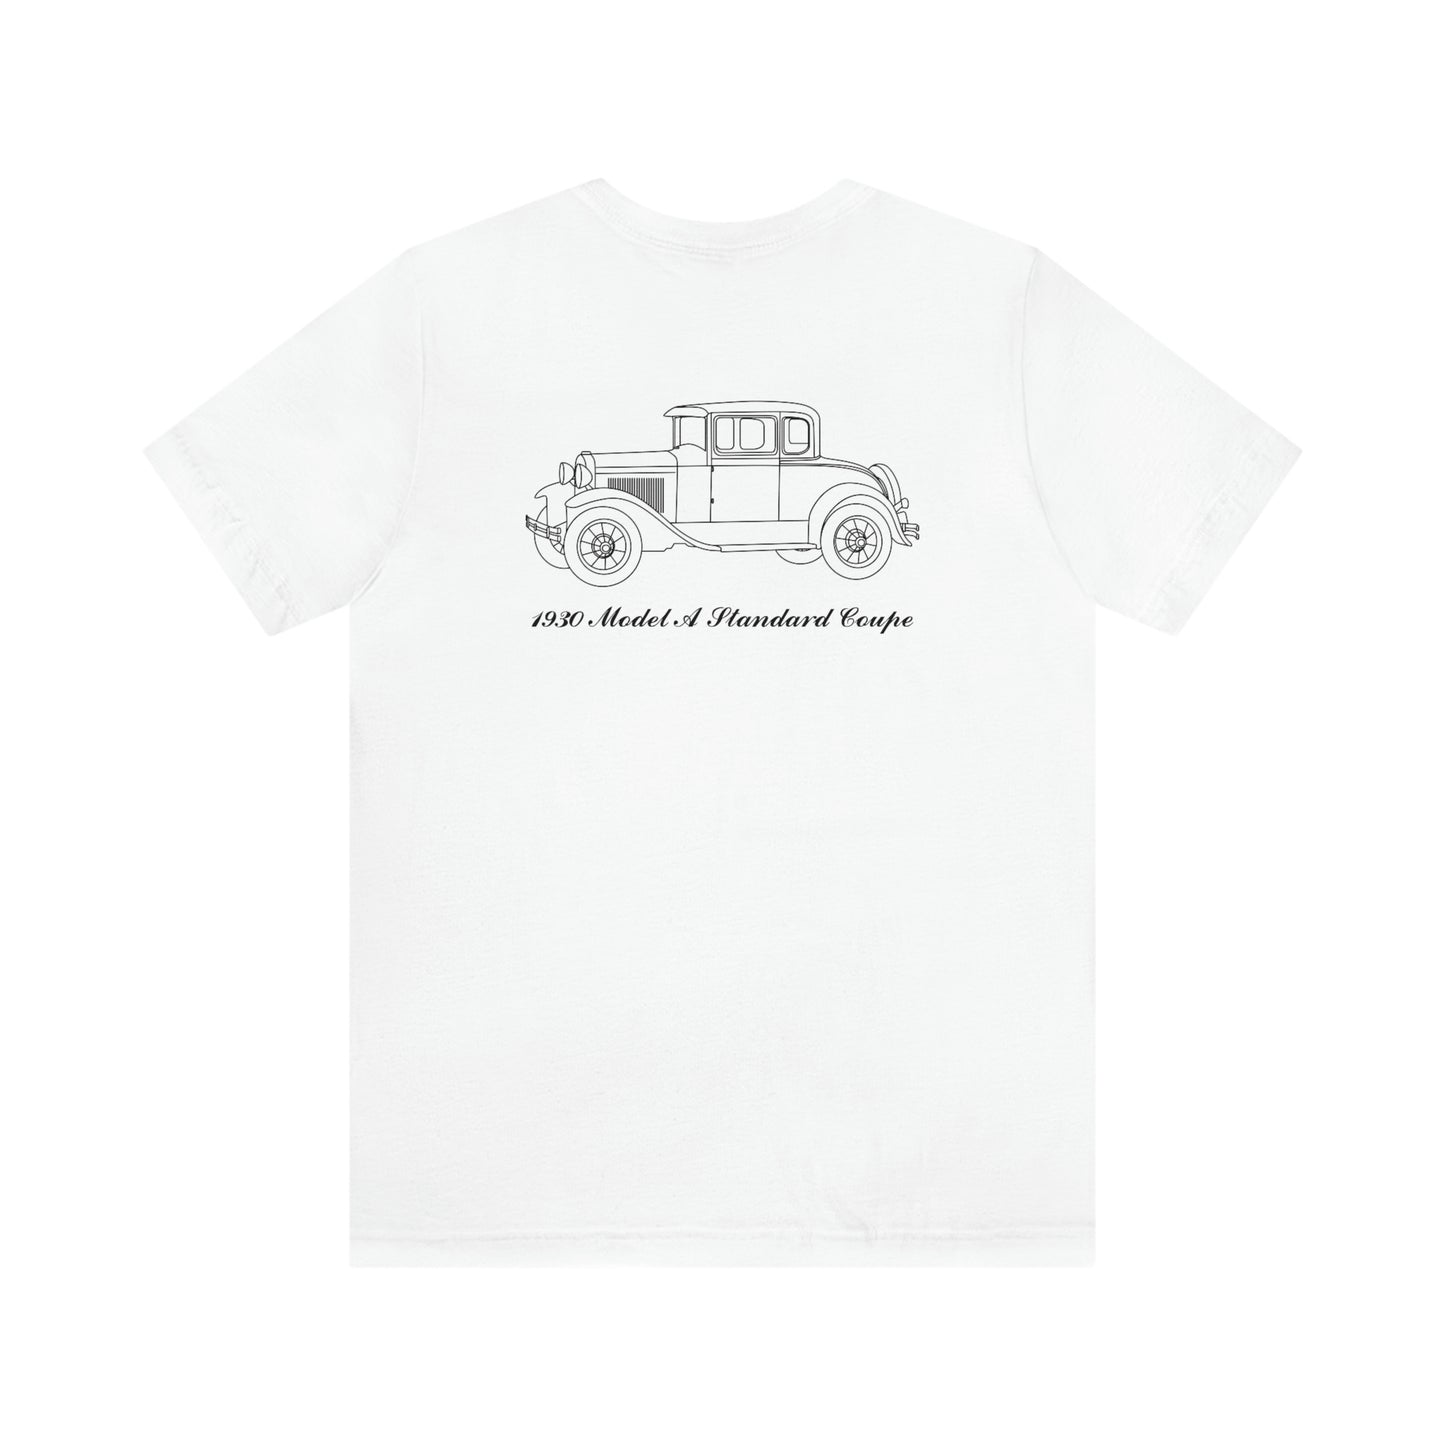 1930 Standard Coupe T-Shirt